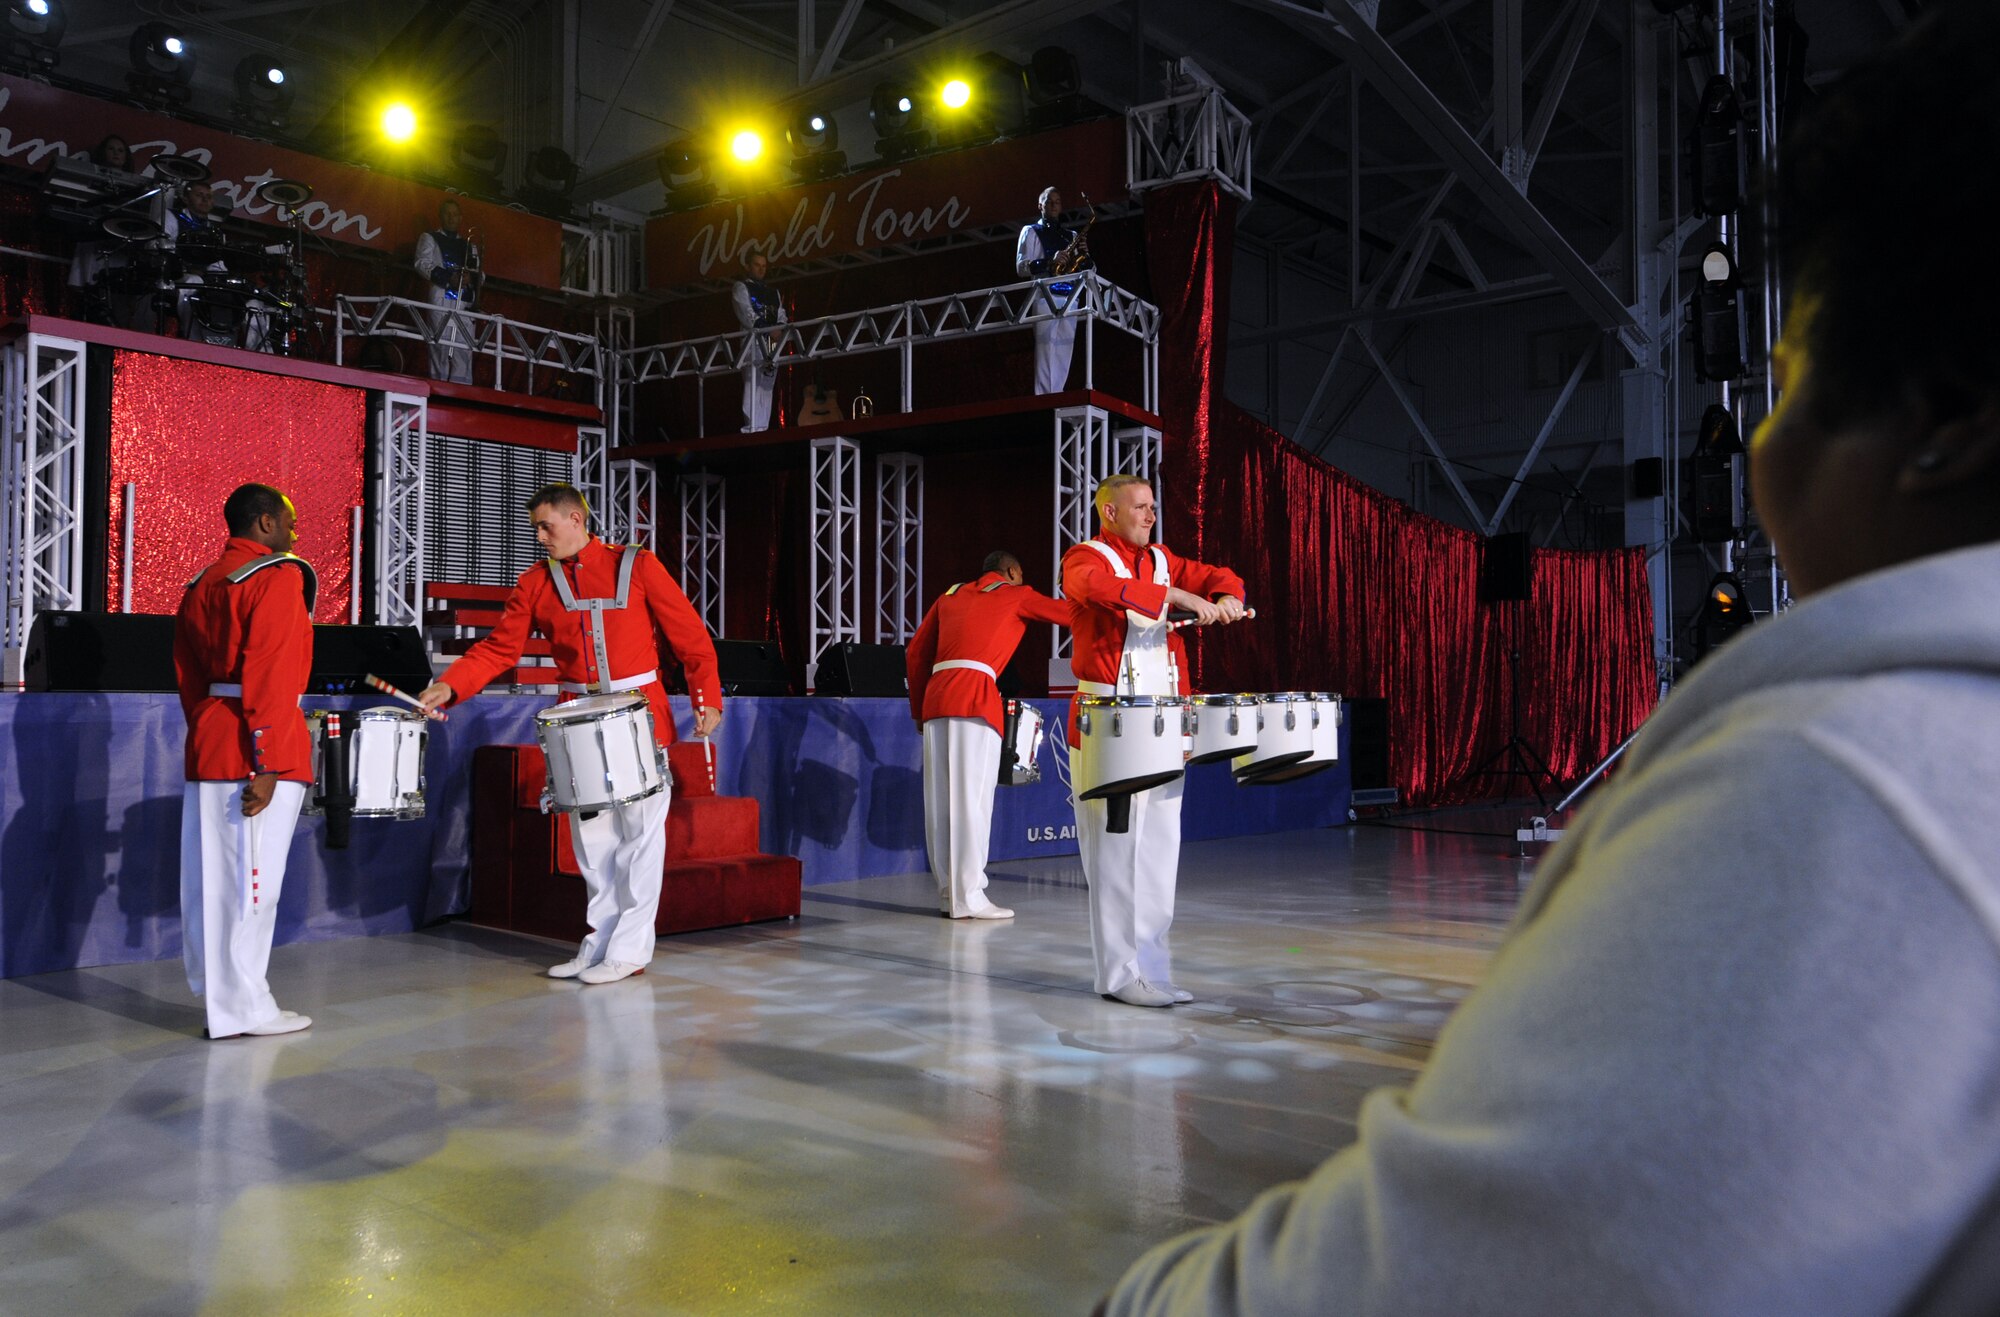 MOUNTAIN HOME AIR FORCE BASE, Idaho – Members of the Tops in Blue drum line perform for Gunfighters inside of hangar 1331 as part of their world tour 2011, June 18. In 1953 Maj. Al Reilly started an Air Force world-wide talent contest to recognize talented Airmen and discover the highest caliber of entertainment to provide to Air Force families around the world. (U.S. Air Force photo by Senior Airman Debbie Lockhart)